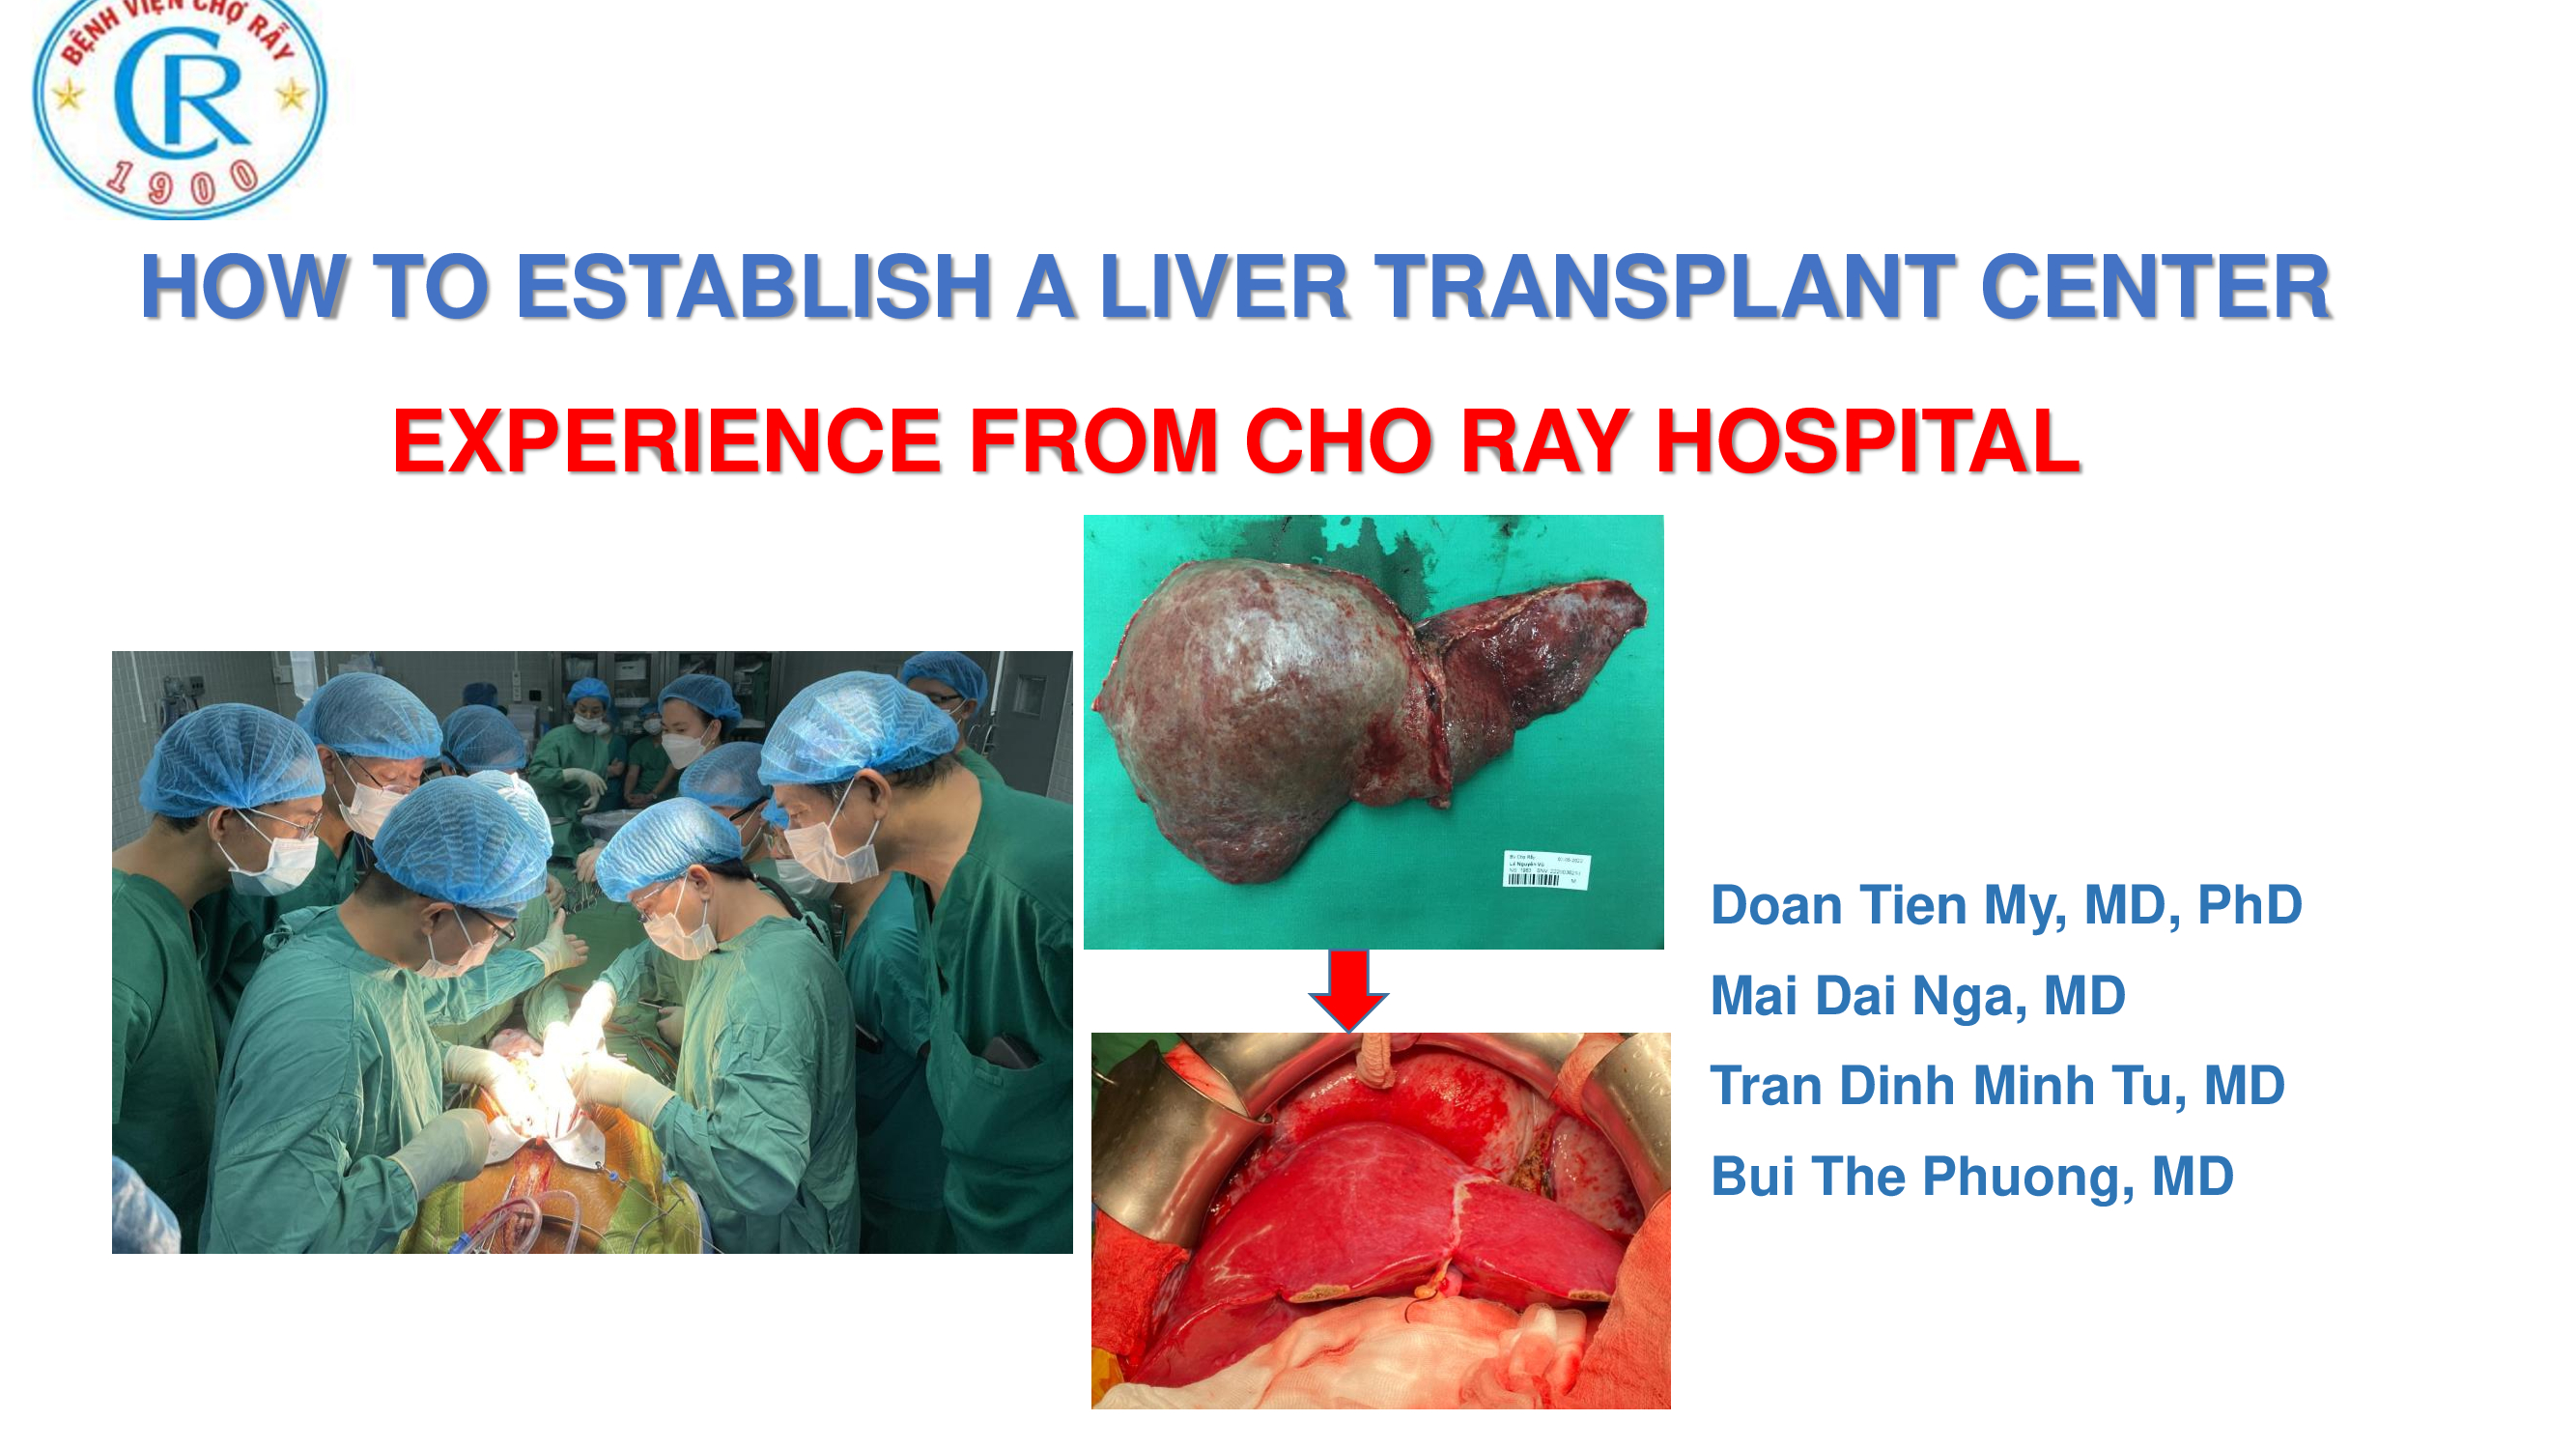 How to establish a liver transplant center experience from Cho Ray hospital